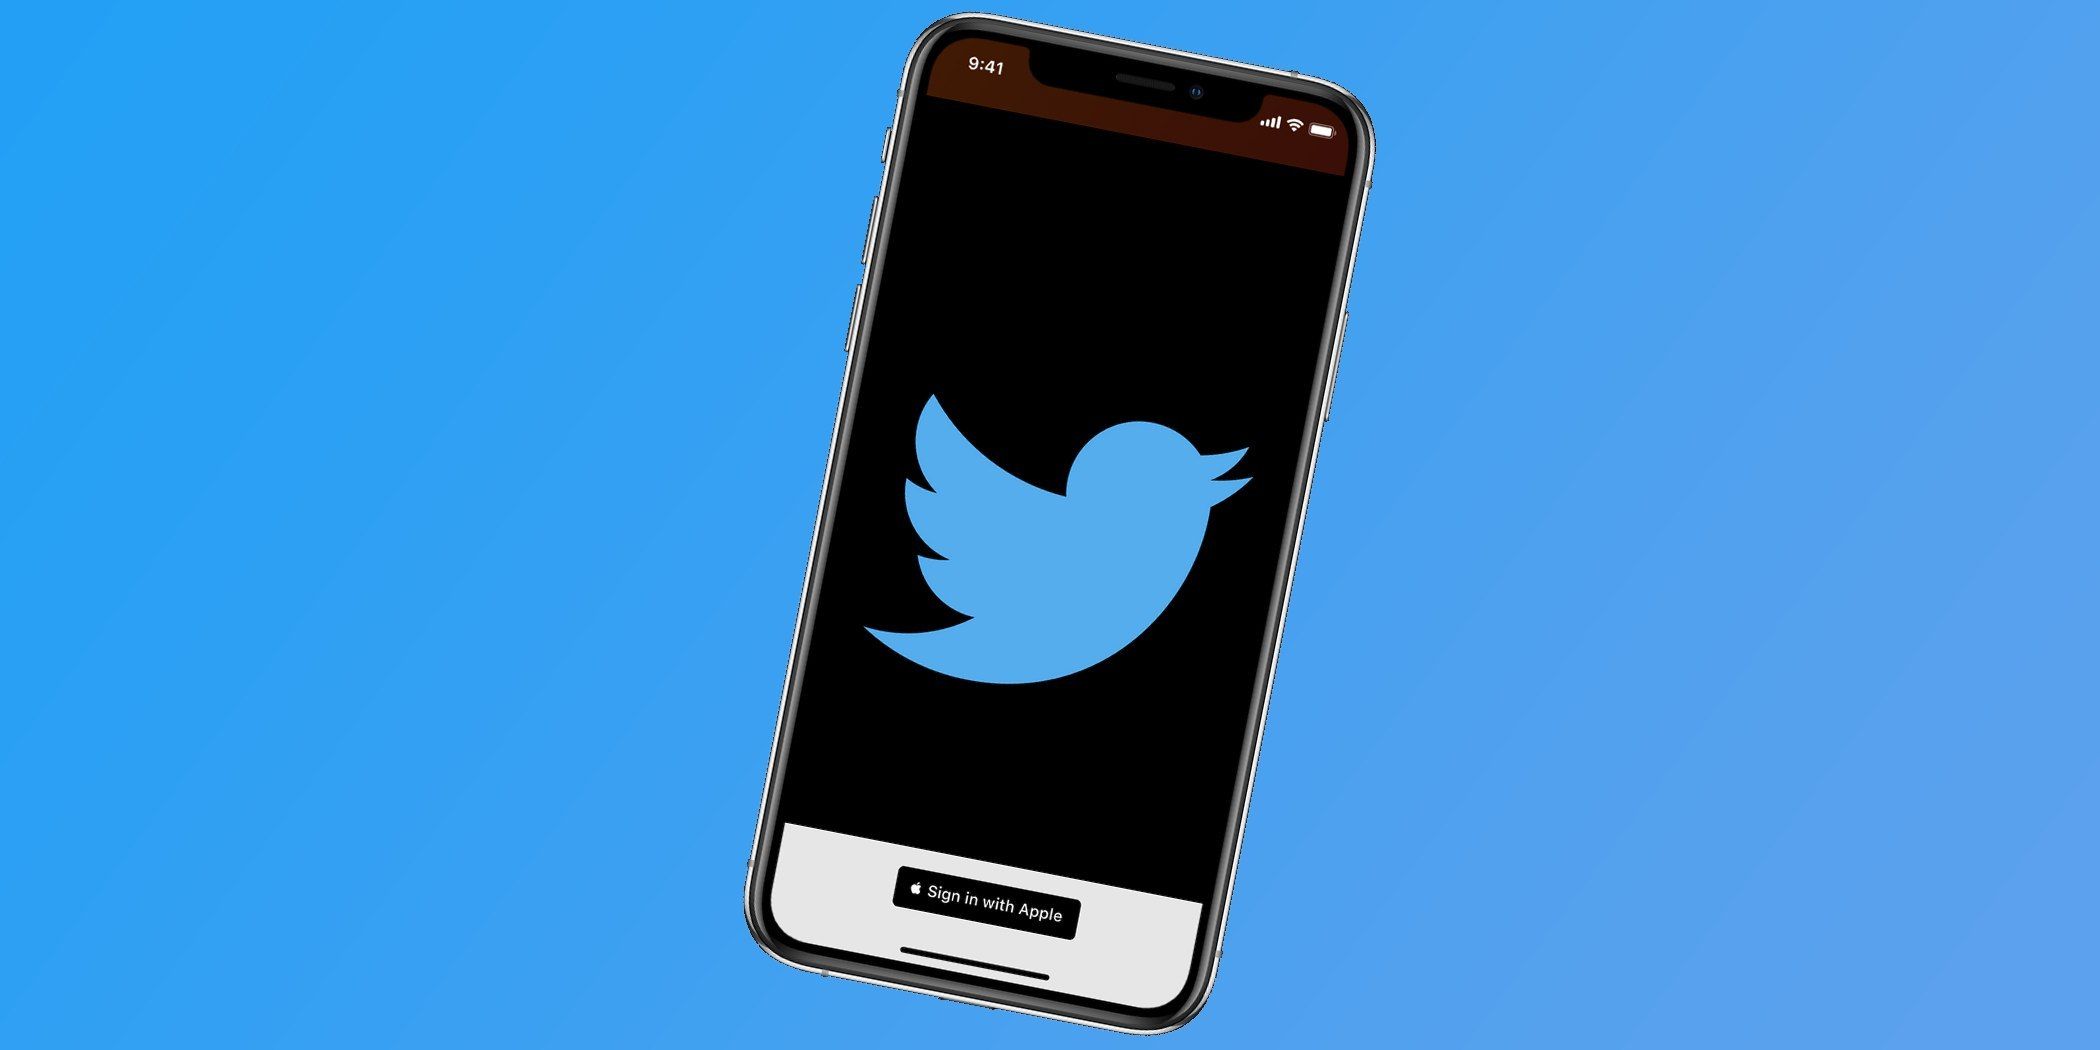 iOS Beta Users Can Now Create A Twitter Account Using Their Apple ID